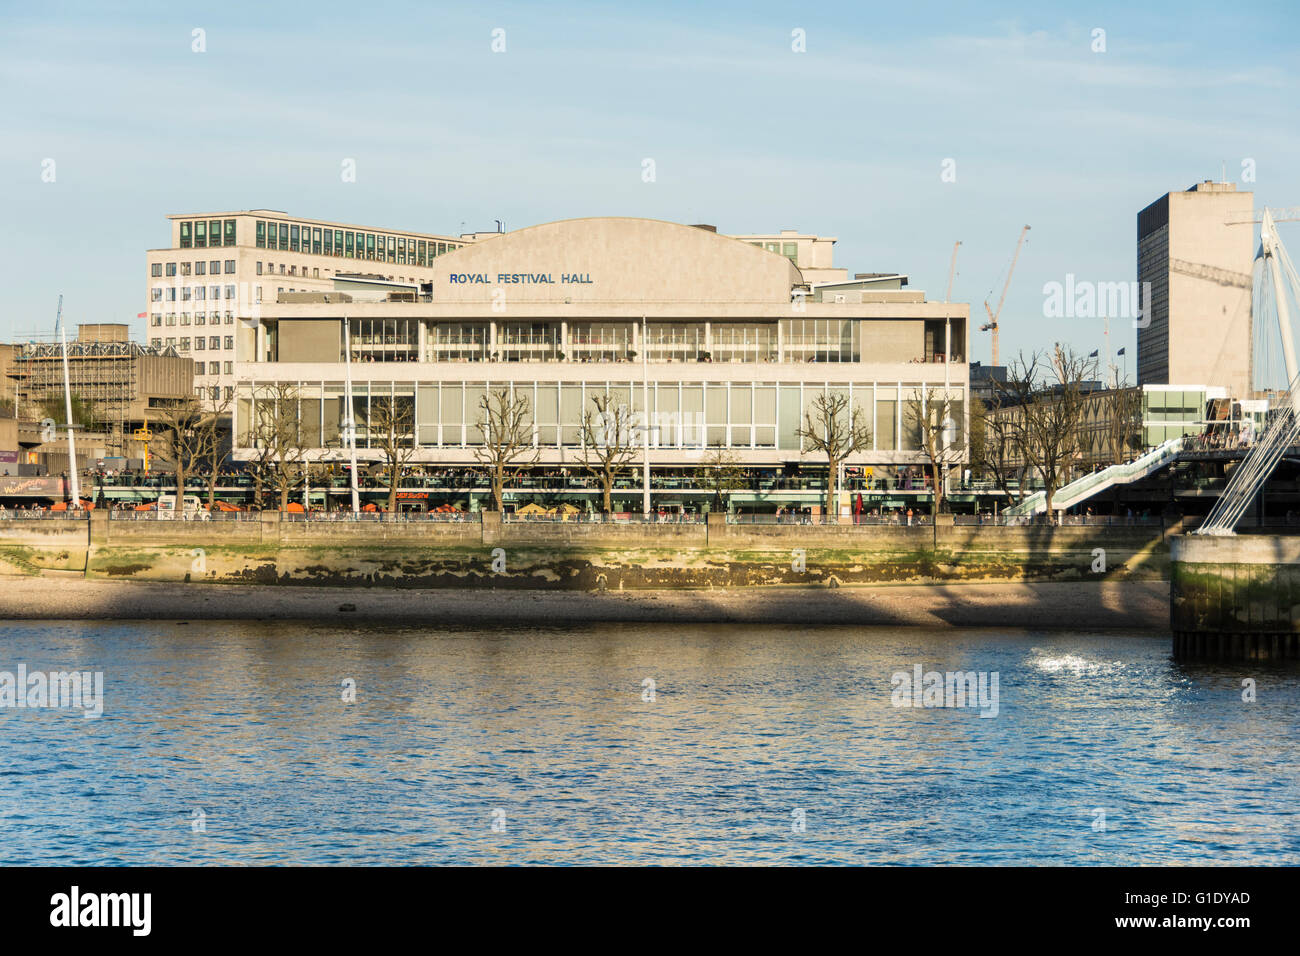 Royal Festival Hall on the Southbank of the River Thames Stock Photo